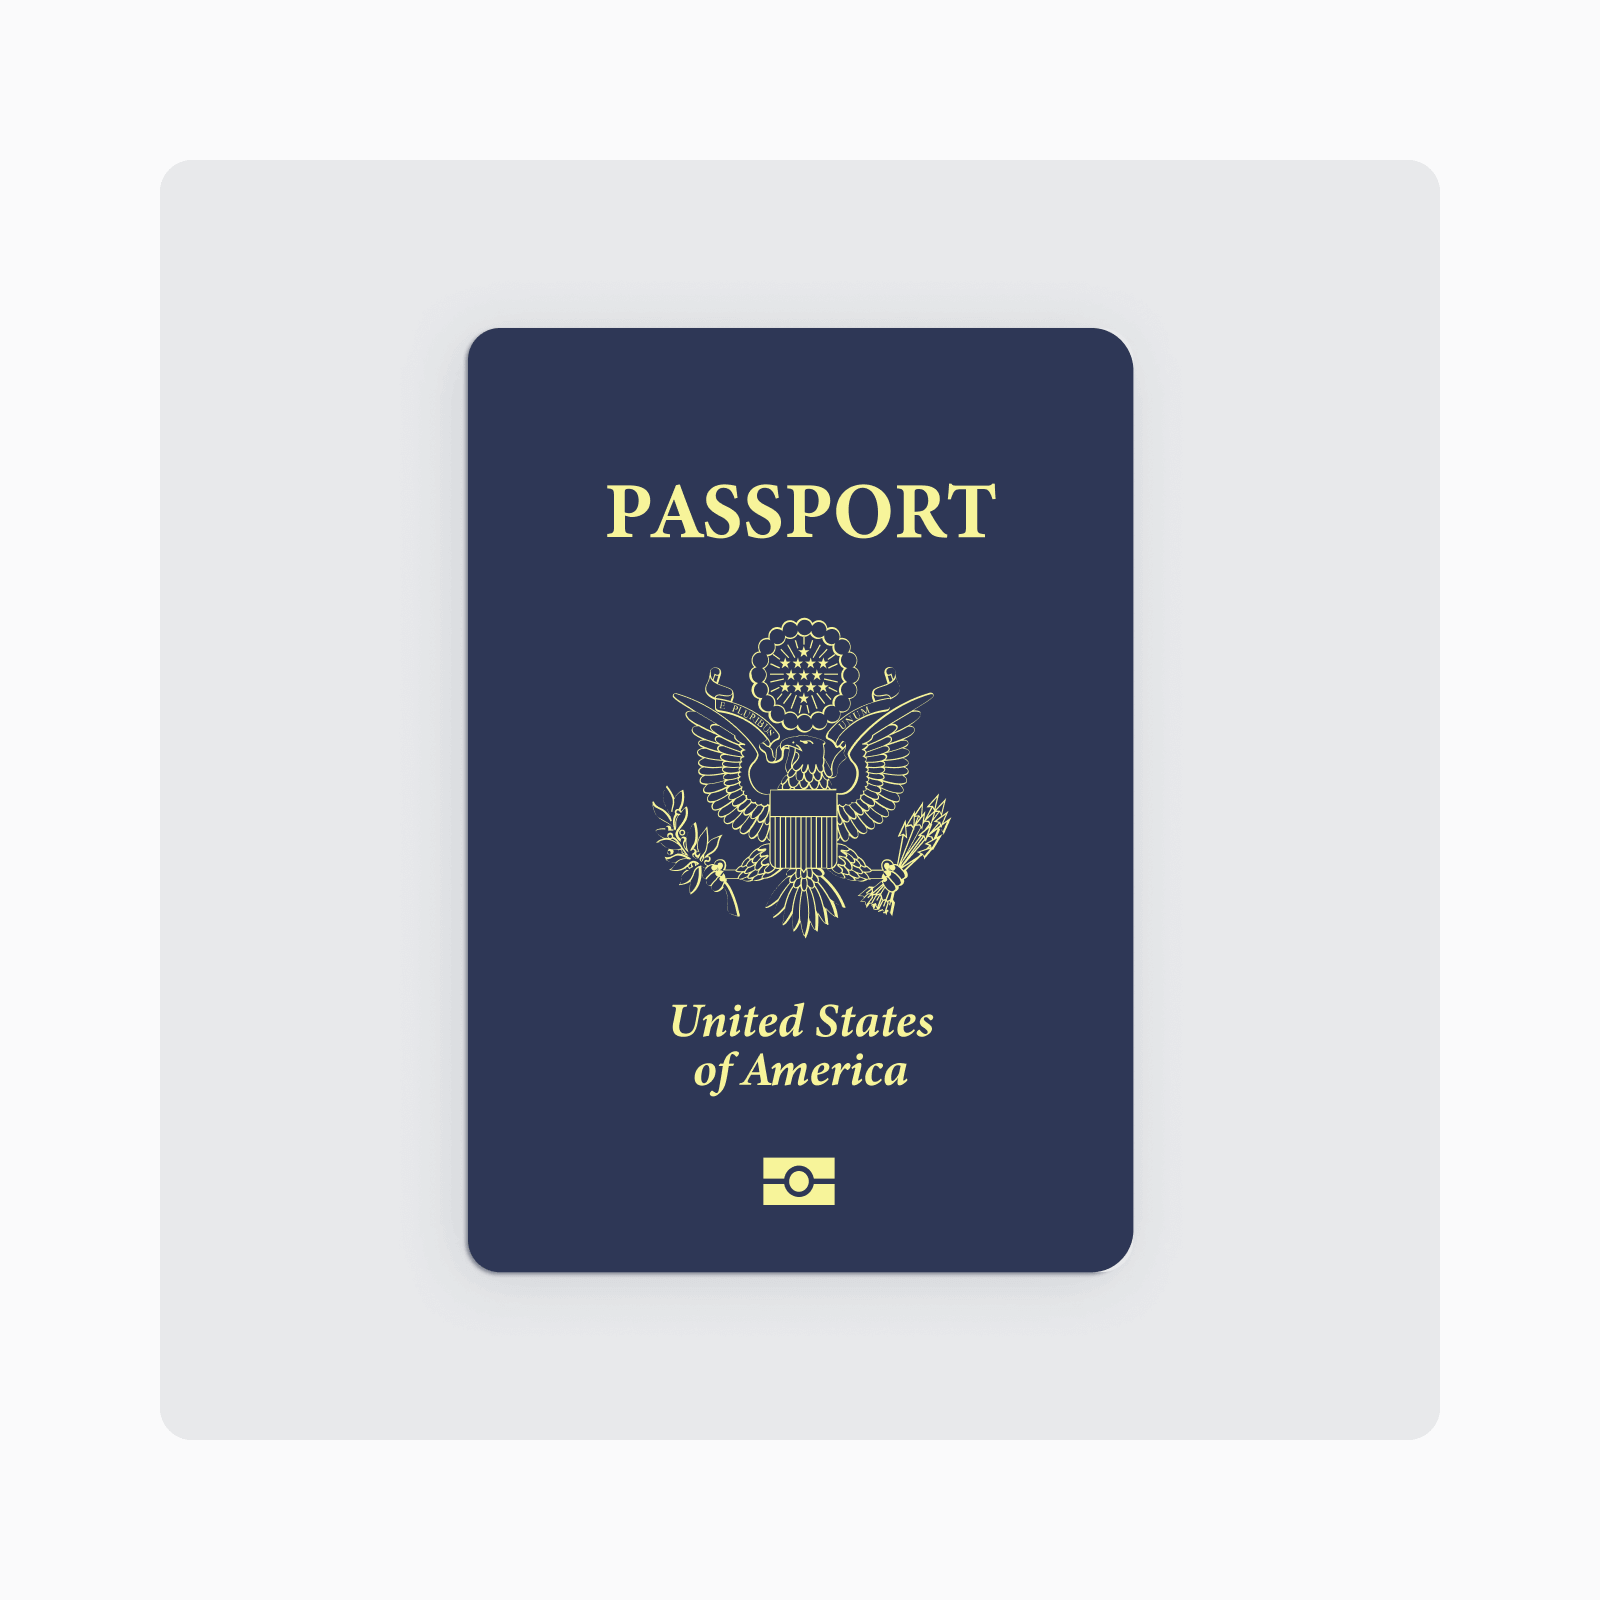 An example of a blue-covered tourist passport that is standard issue to all Americans wishing to travel internationally.